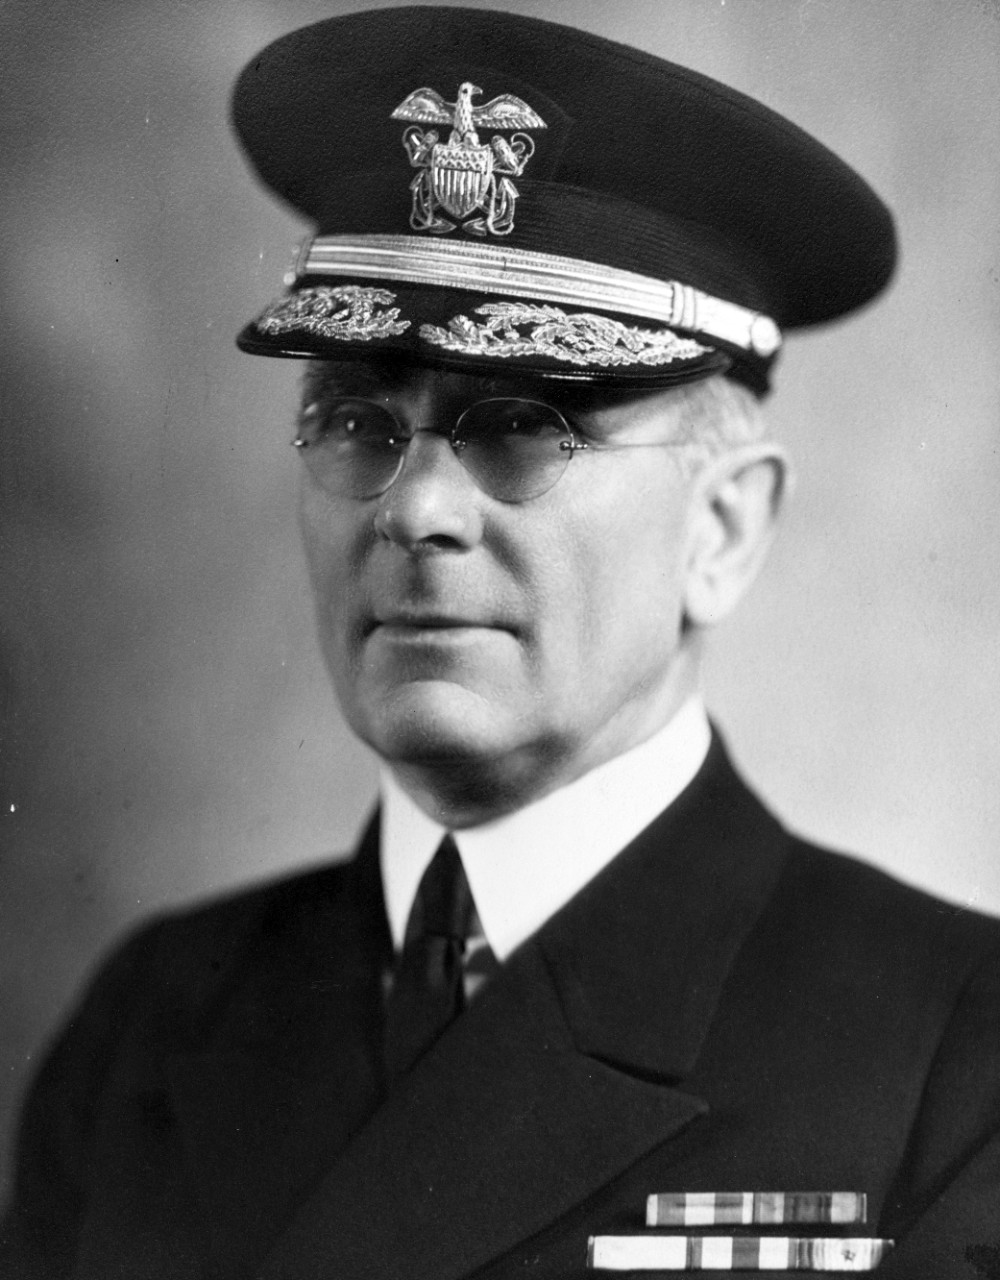 Vice Admiral William H. Standley, USN